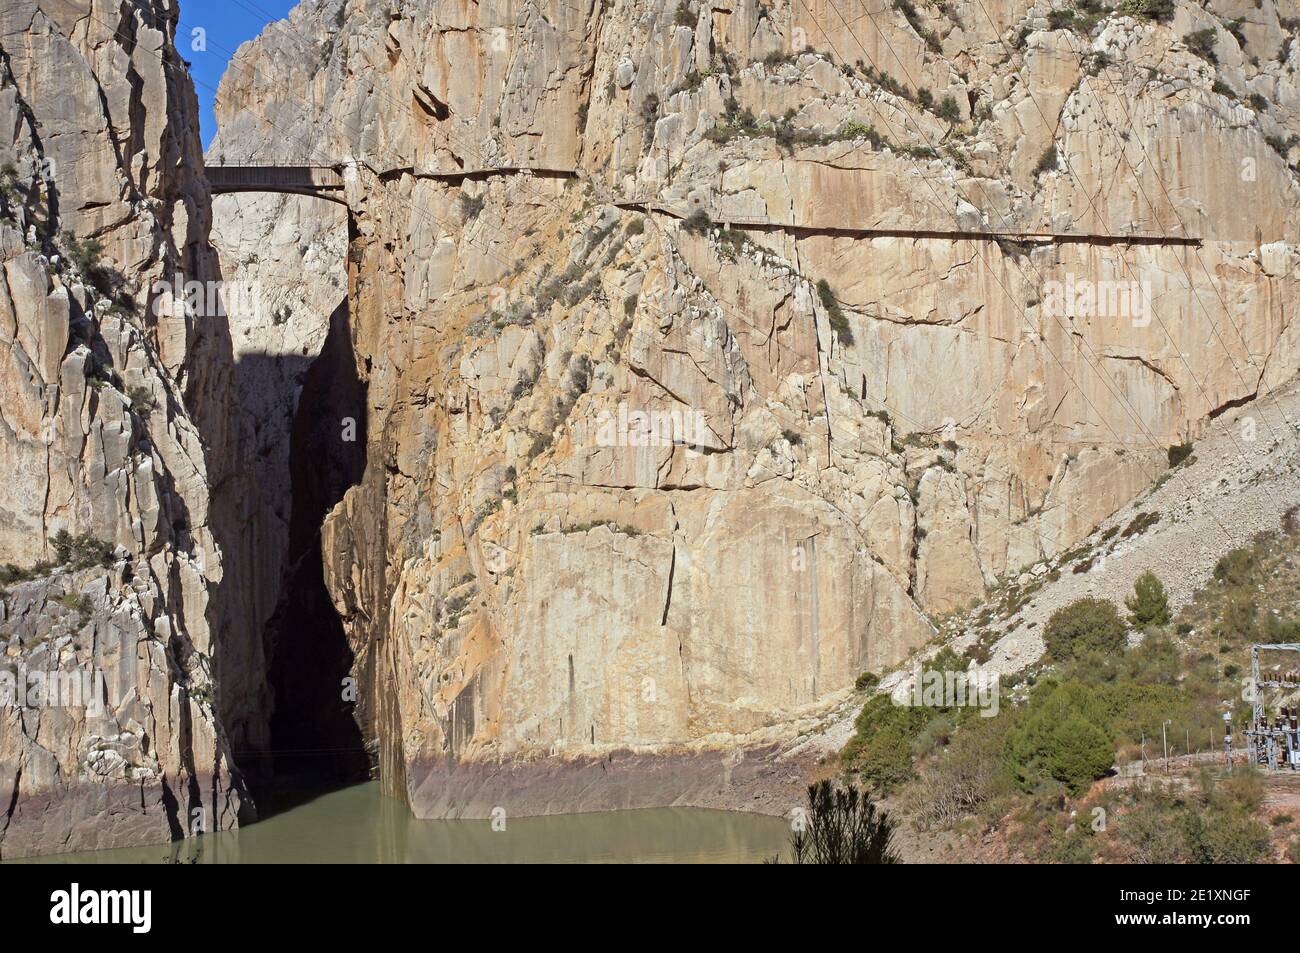 Spain: the Embalse de Gaitenejo and the gorge Garganta del Chorro. High on the cliffs is the Caminito del Rey; a walkway created for the hydro-electri Stock Photo